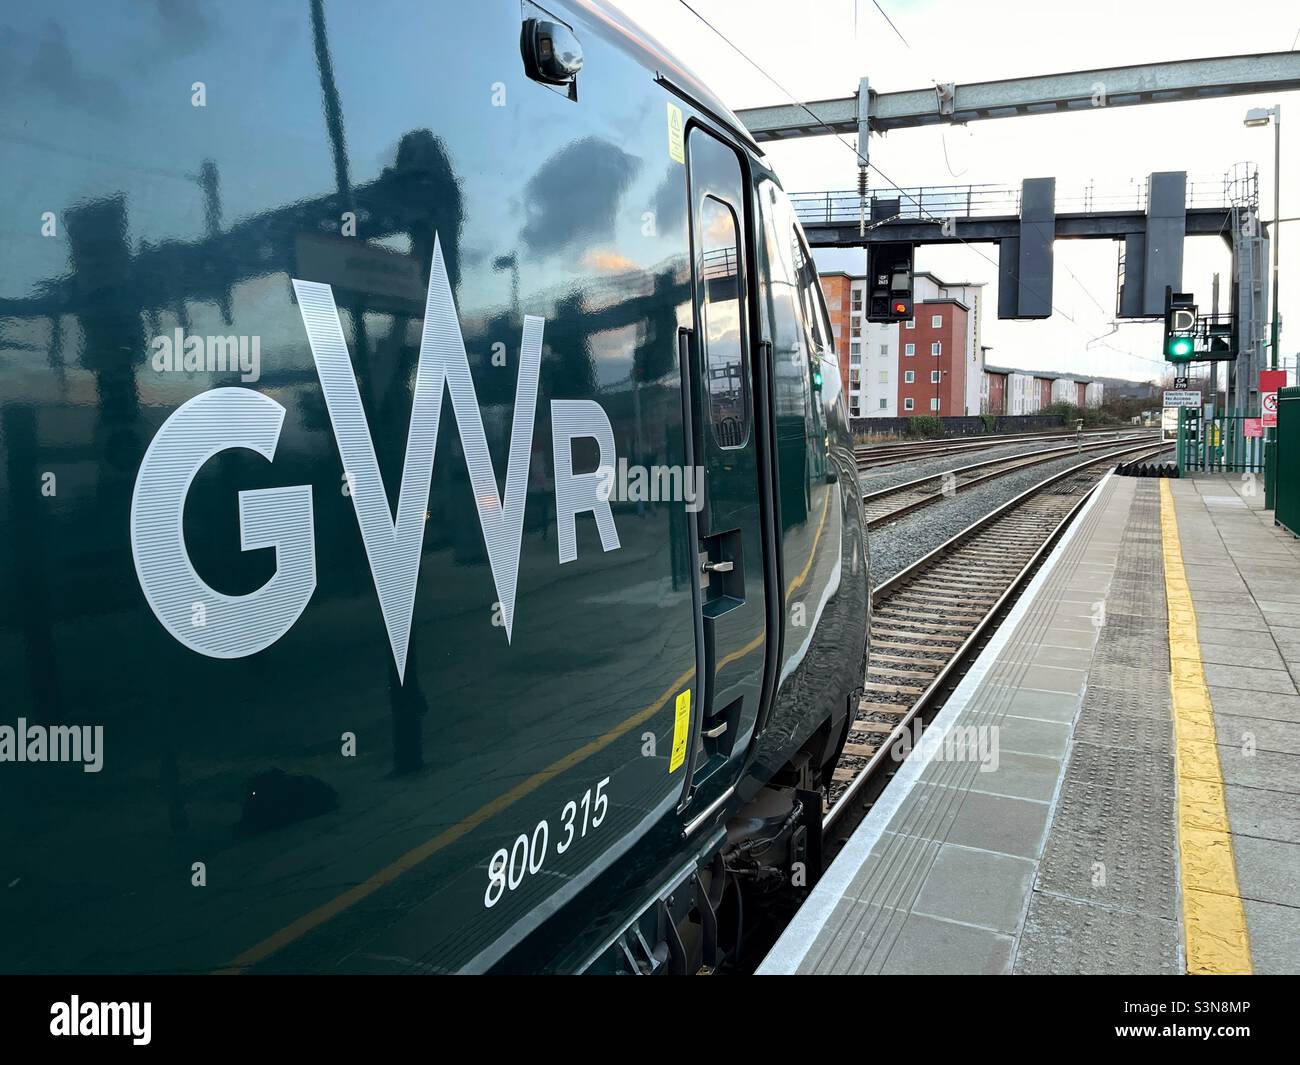 Cardiff, Wales - February 2022: Front of a Great Western Railway high speed train alongside a railway station platform Stock Photo